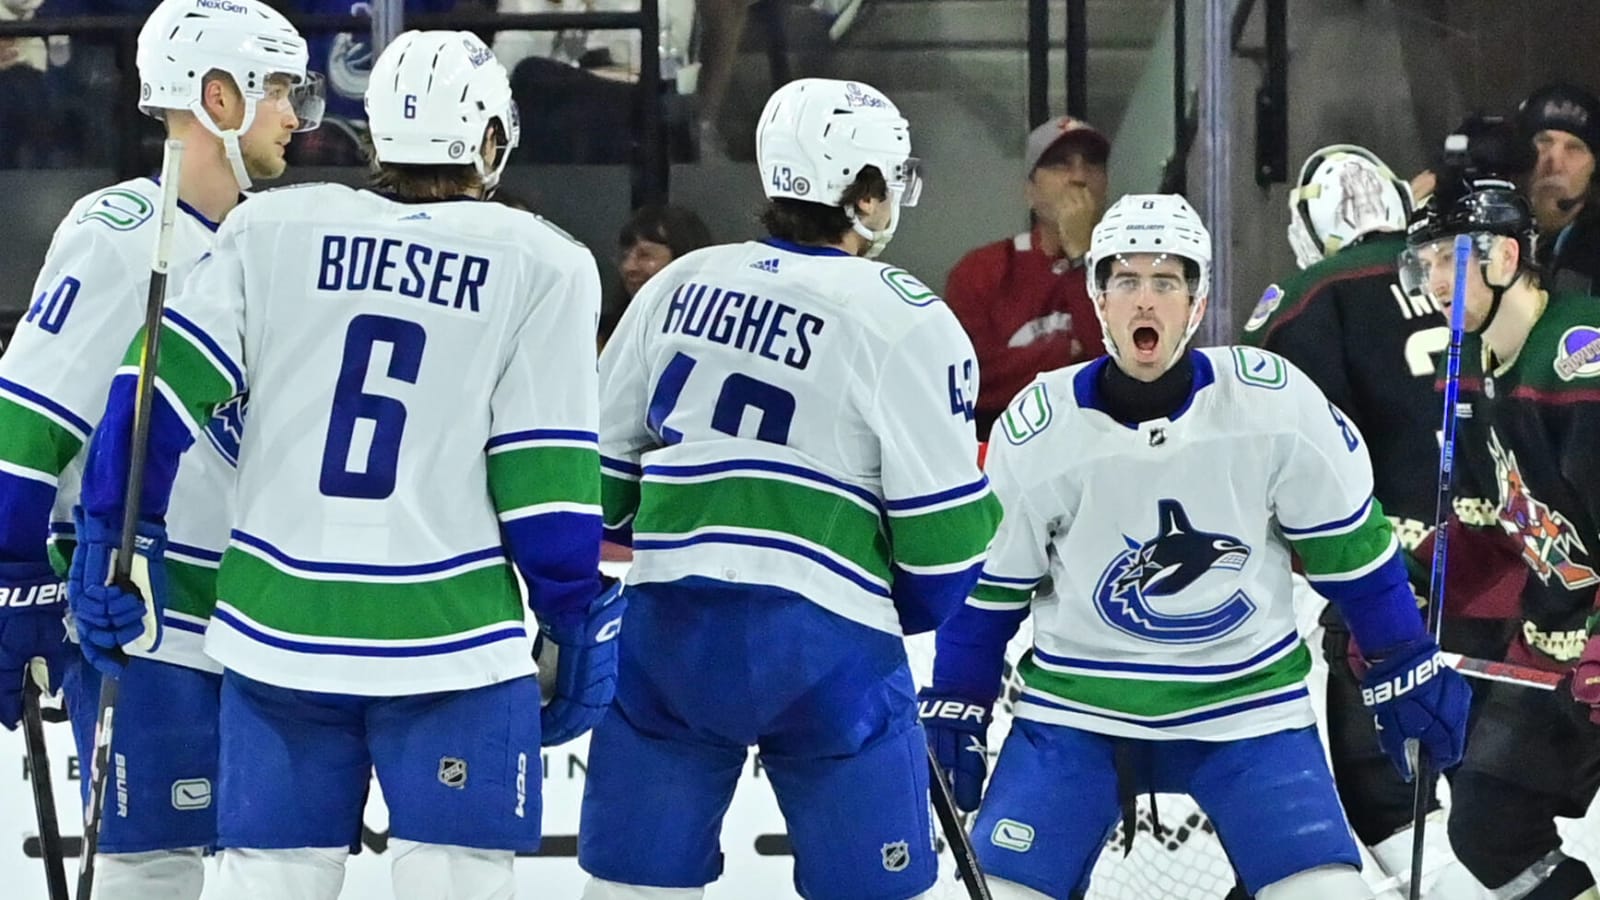 Vancouver Canucks’ 3 stars of the week: Quinn Hughes shines, Garland holds steady, and Silovs stands tall